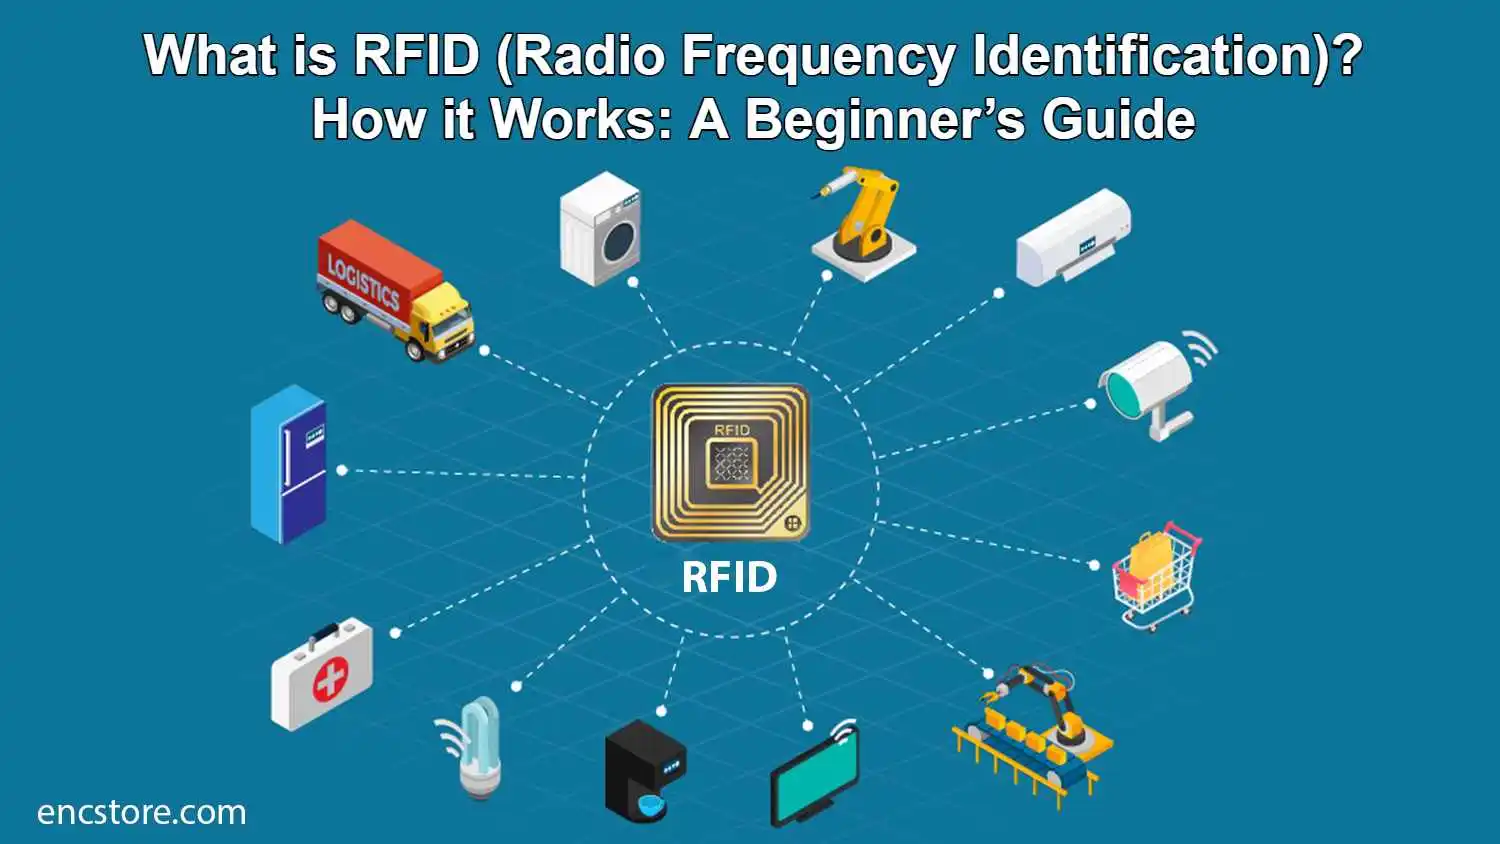 What Is RFID, and How Does It Work? Basics of Radio Frequency Identification